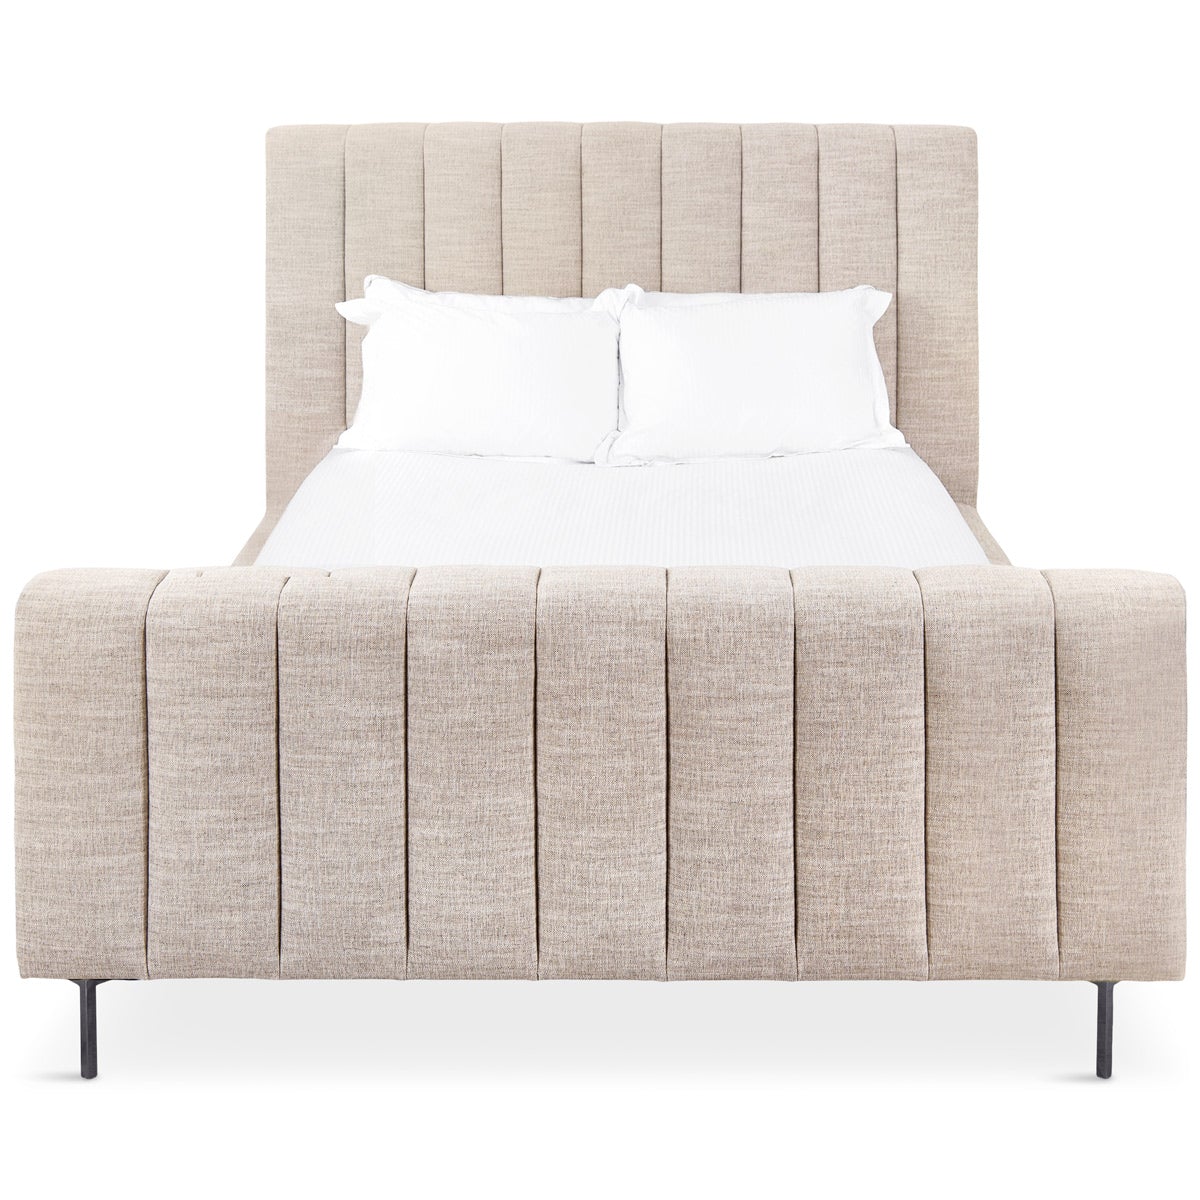 Shoreclub Bed with Footboard in Linen - ModShop1.com